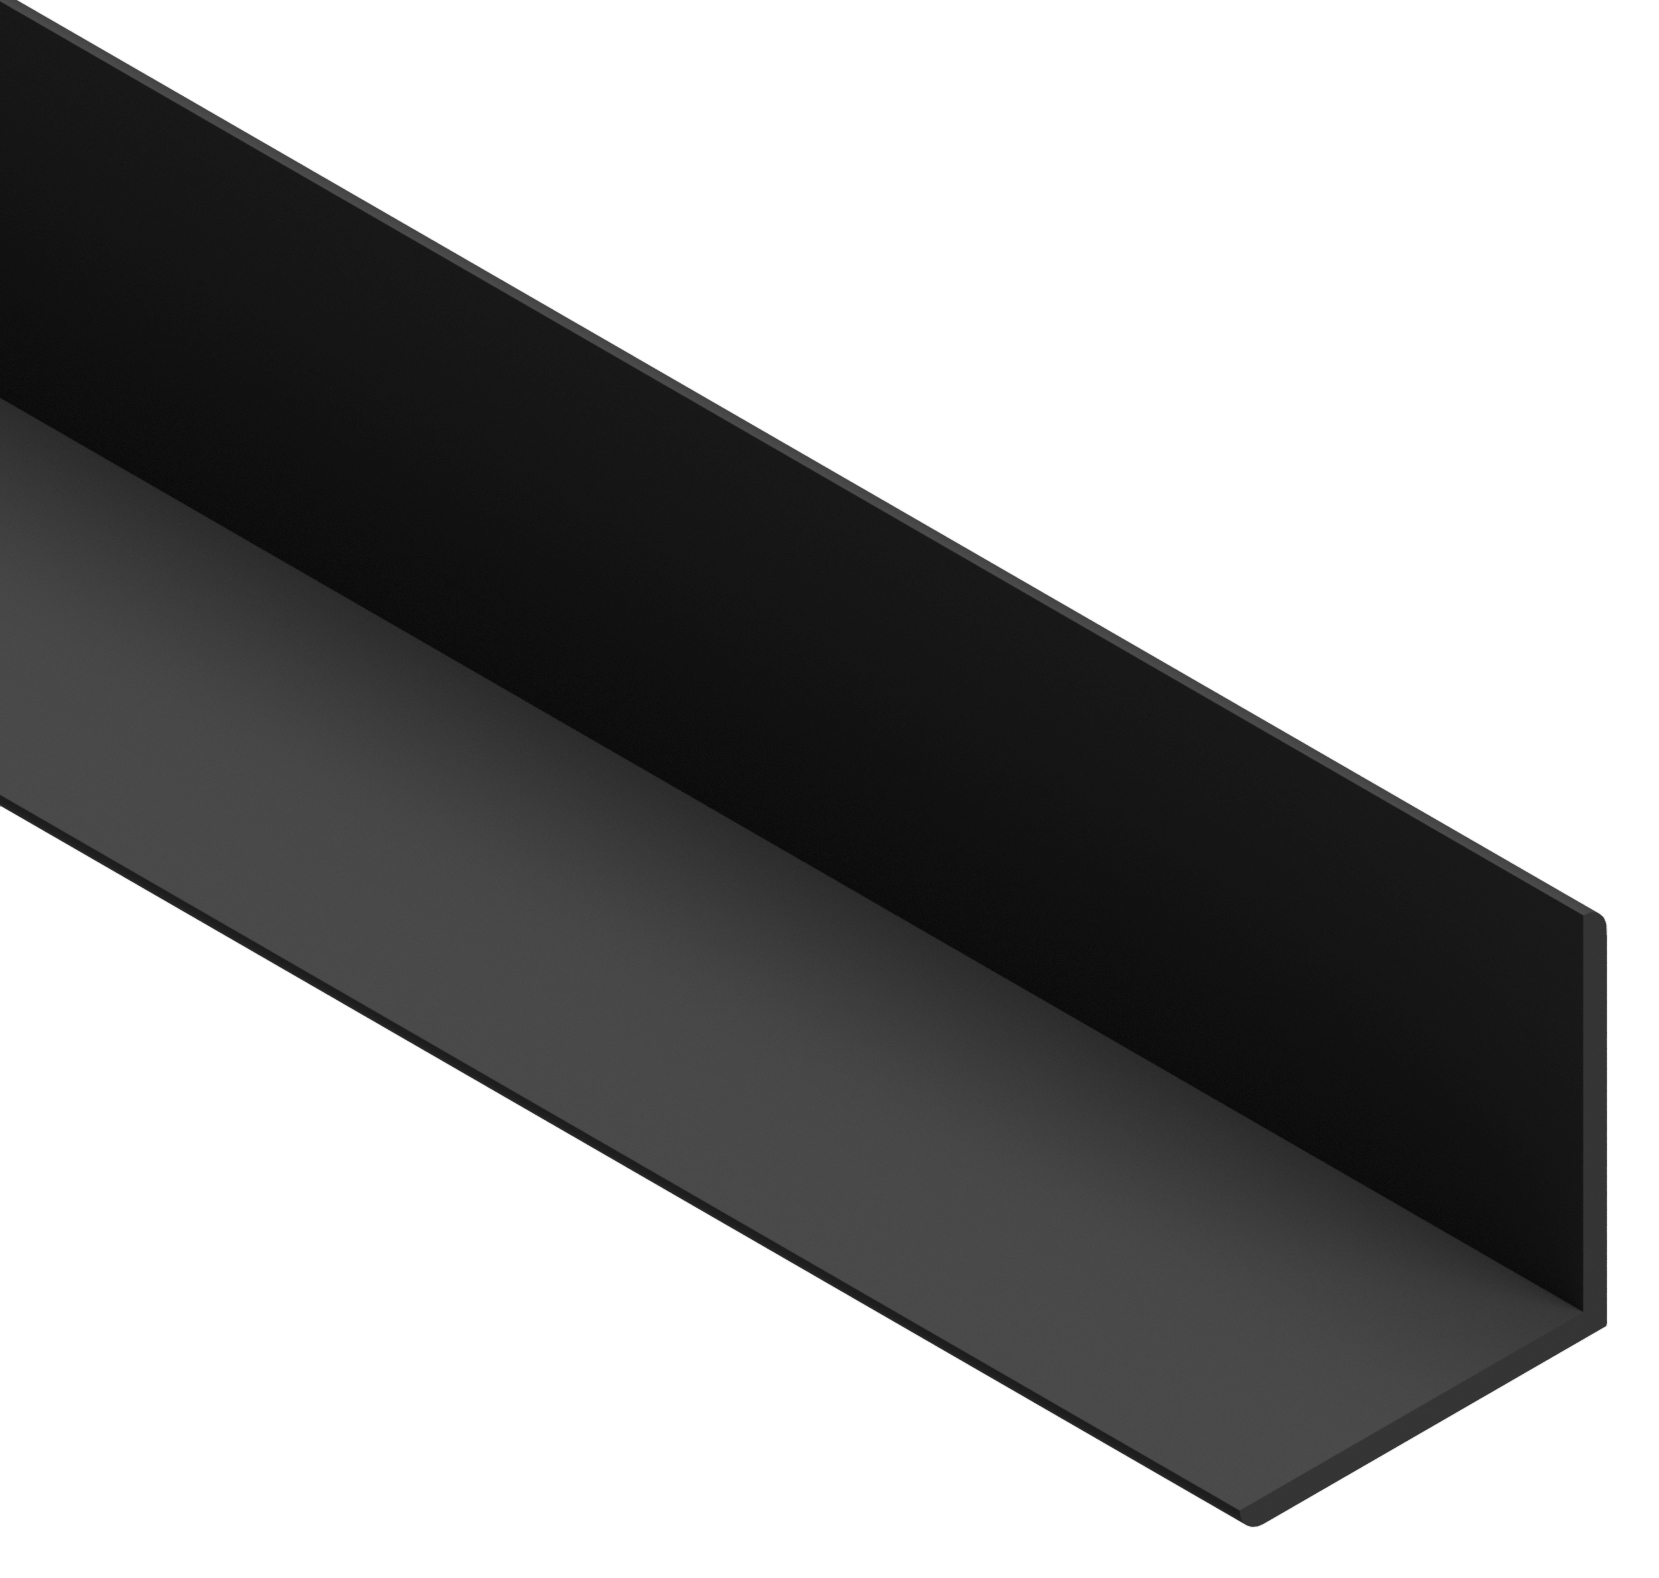 Image of Cheshire Mouldings Black PVC Angle - 18x18x2400mm